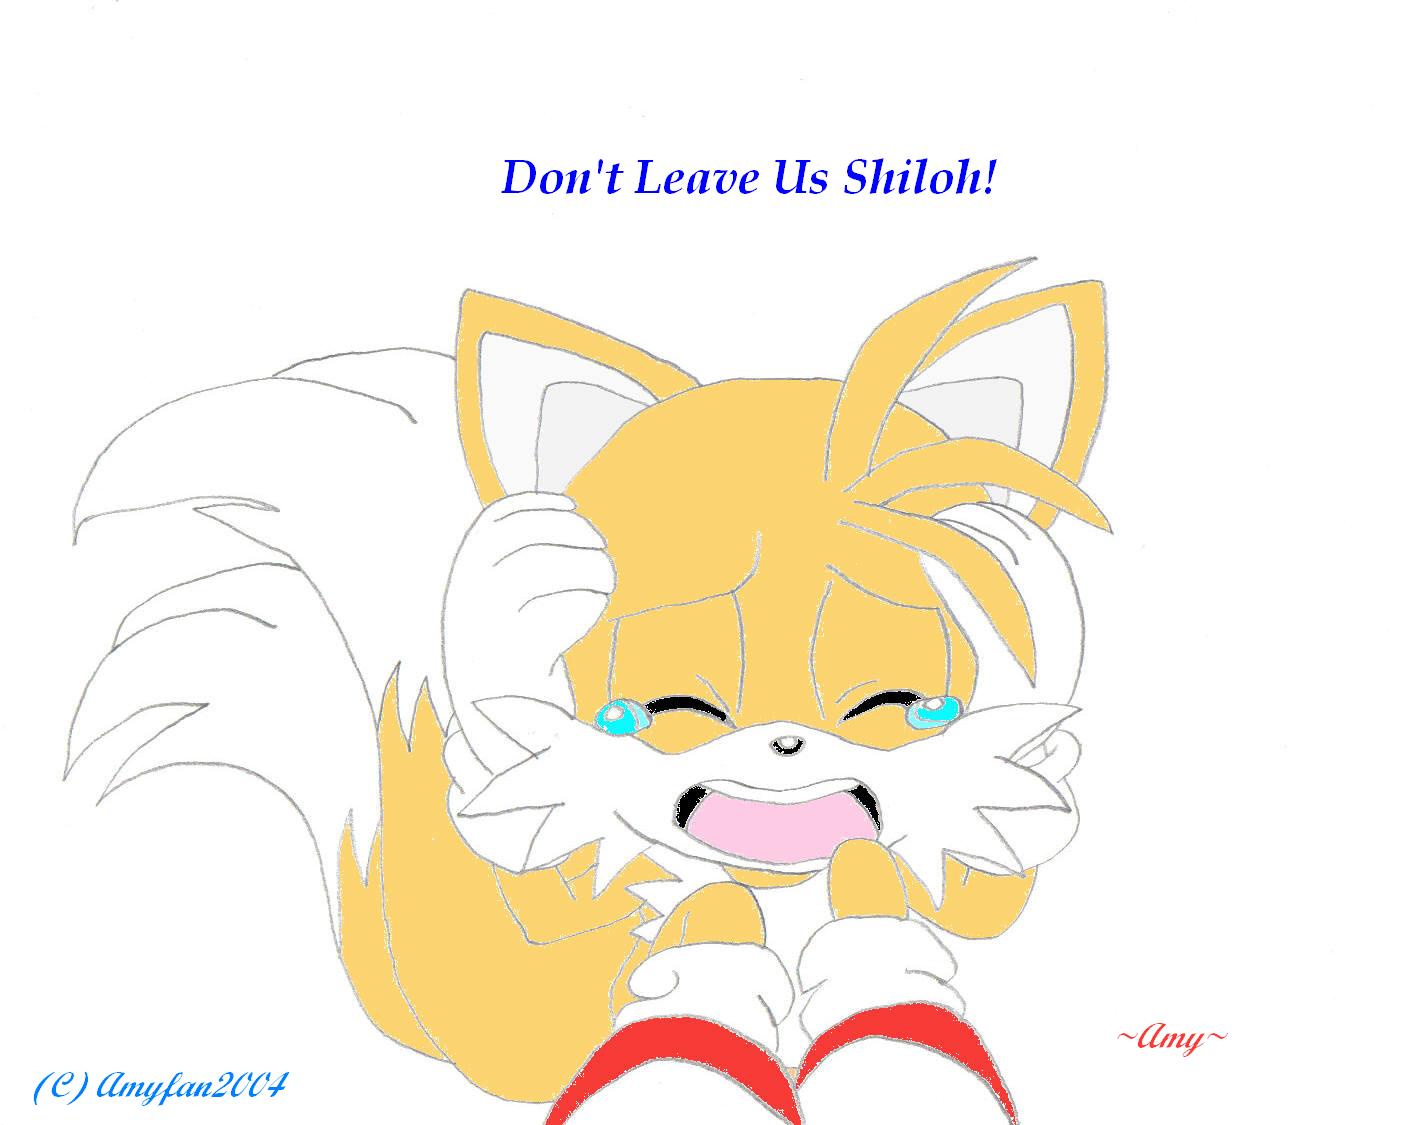 Don't Leave Us Shiloh!!! by Amyfan2004